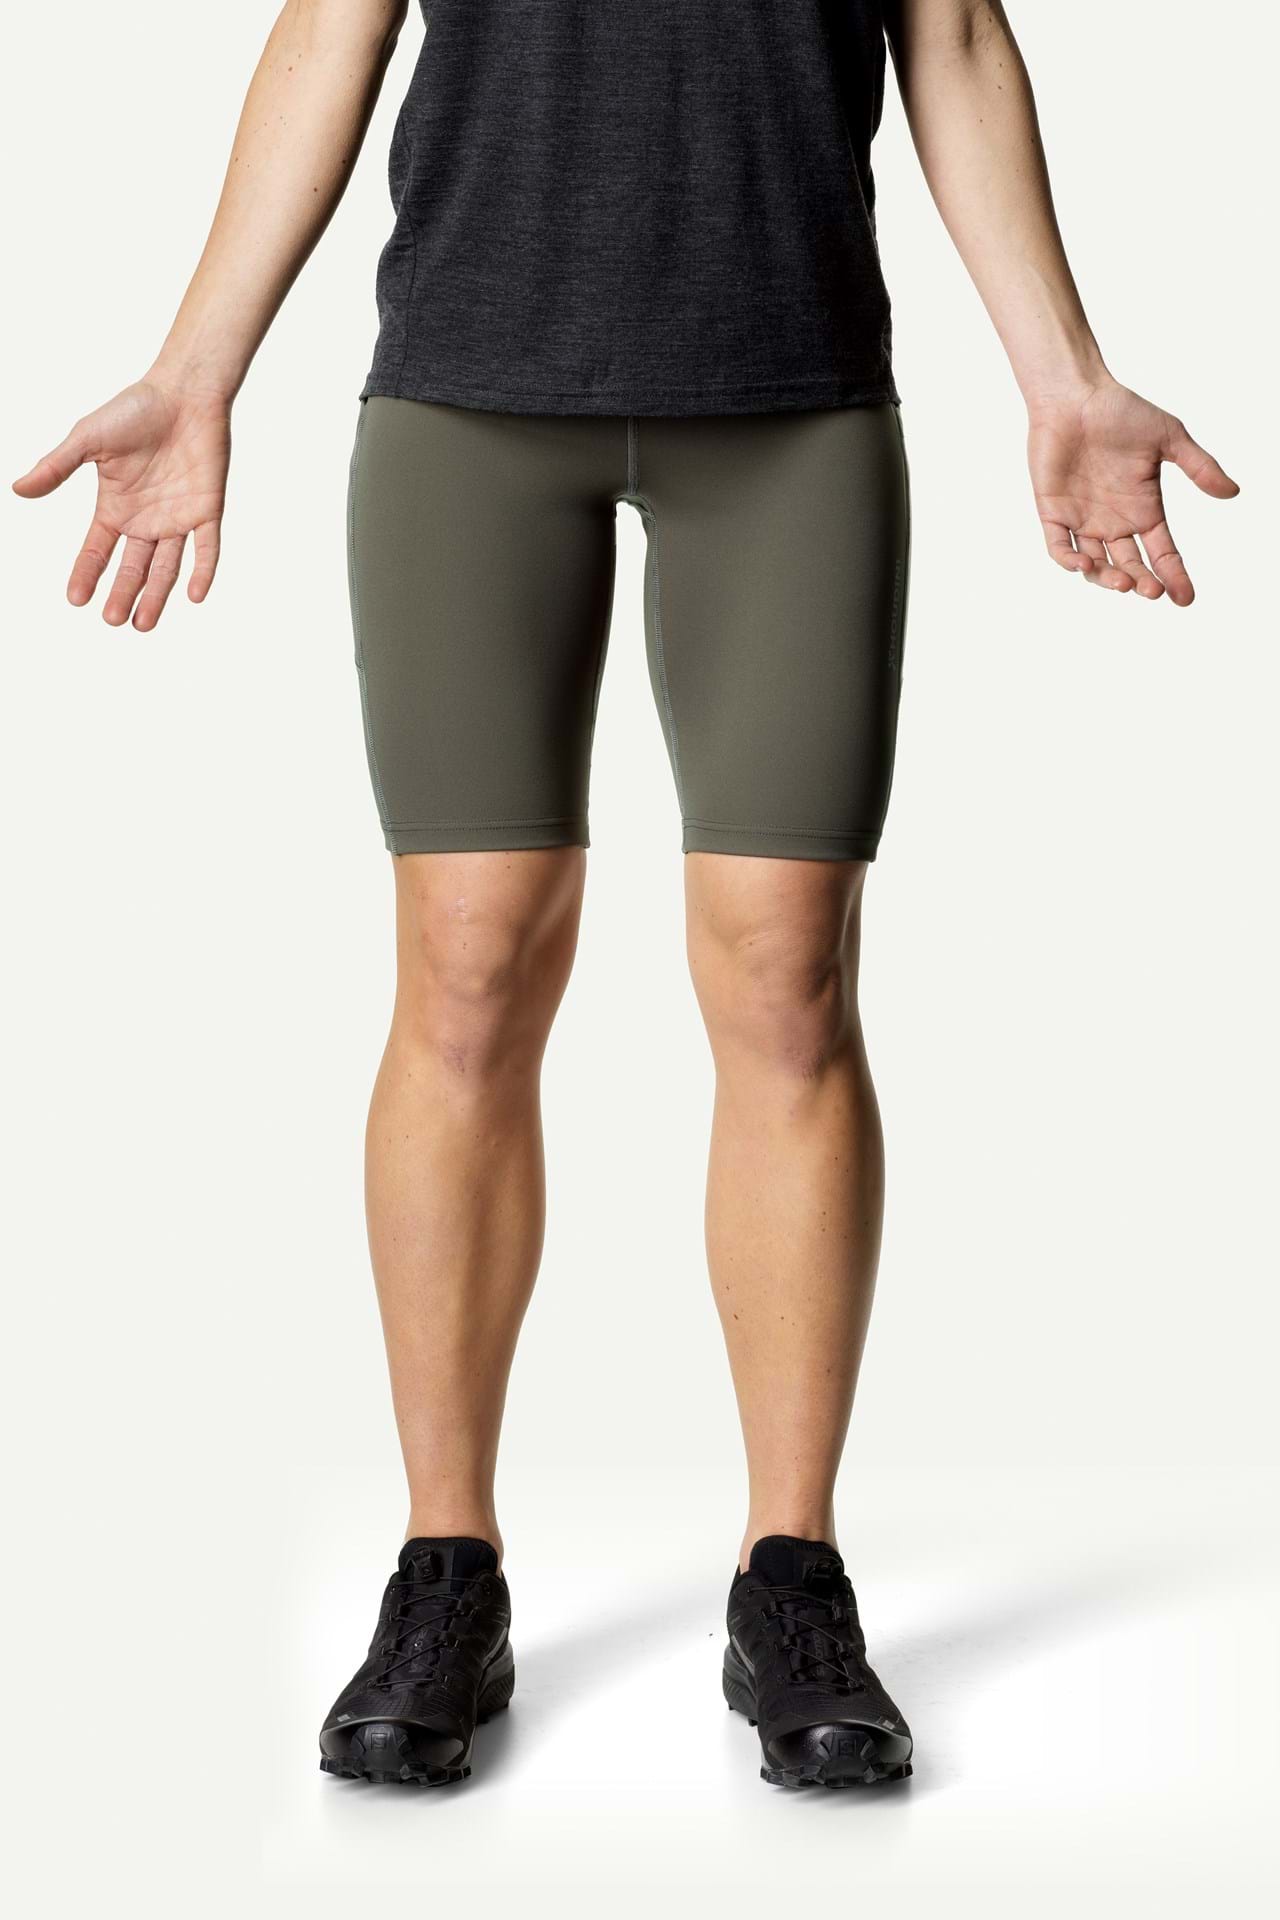 Houdini - W's Adventure Short Tights - Recycled Polyester - Weekendbee - sustainable sportswear